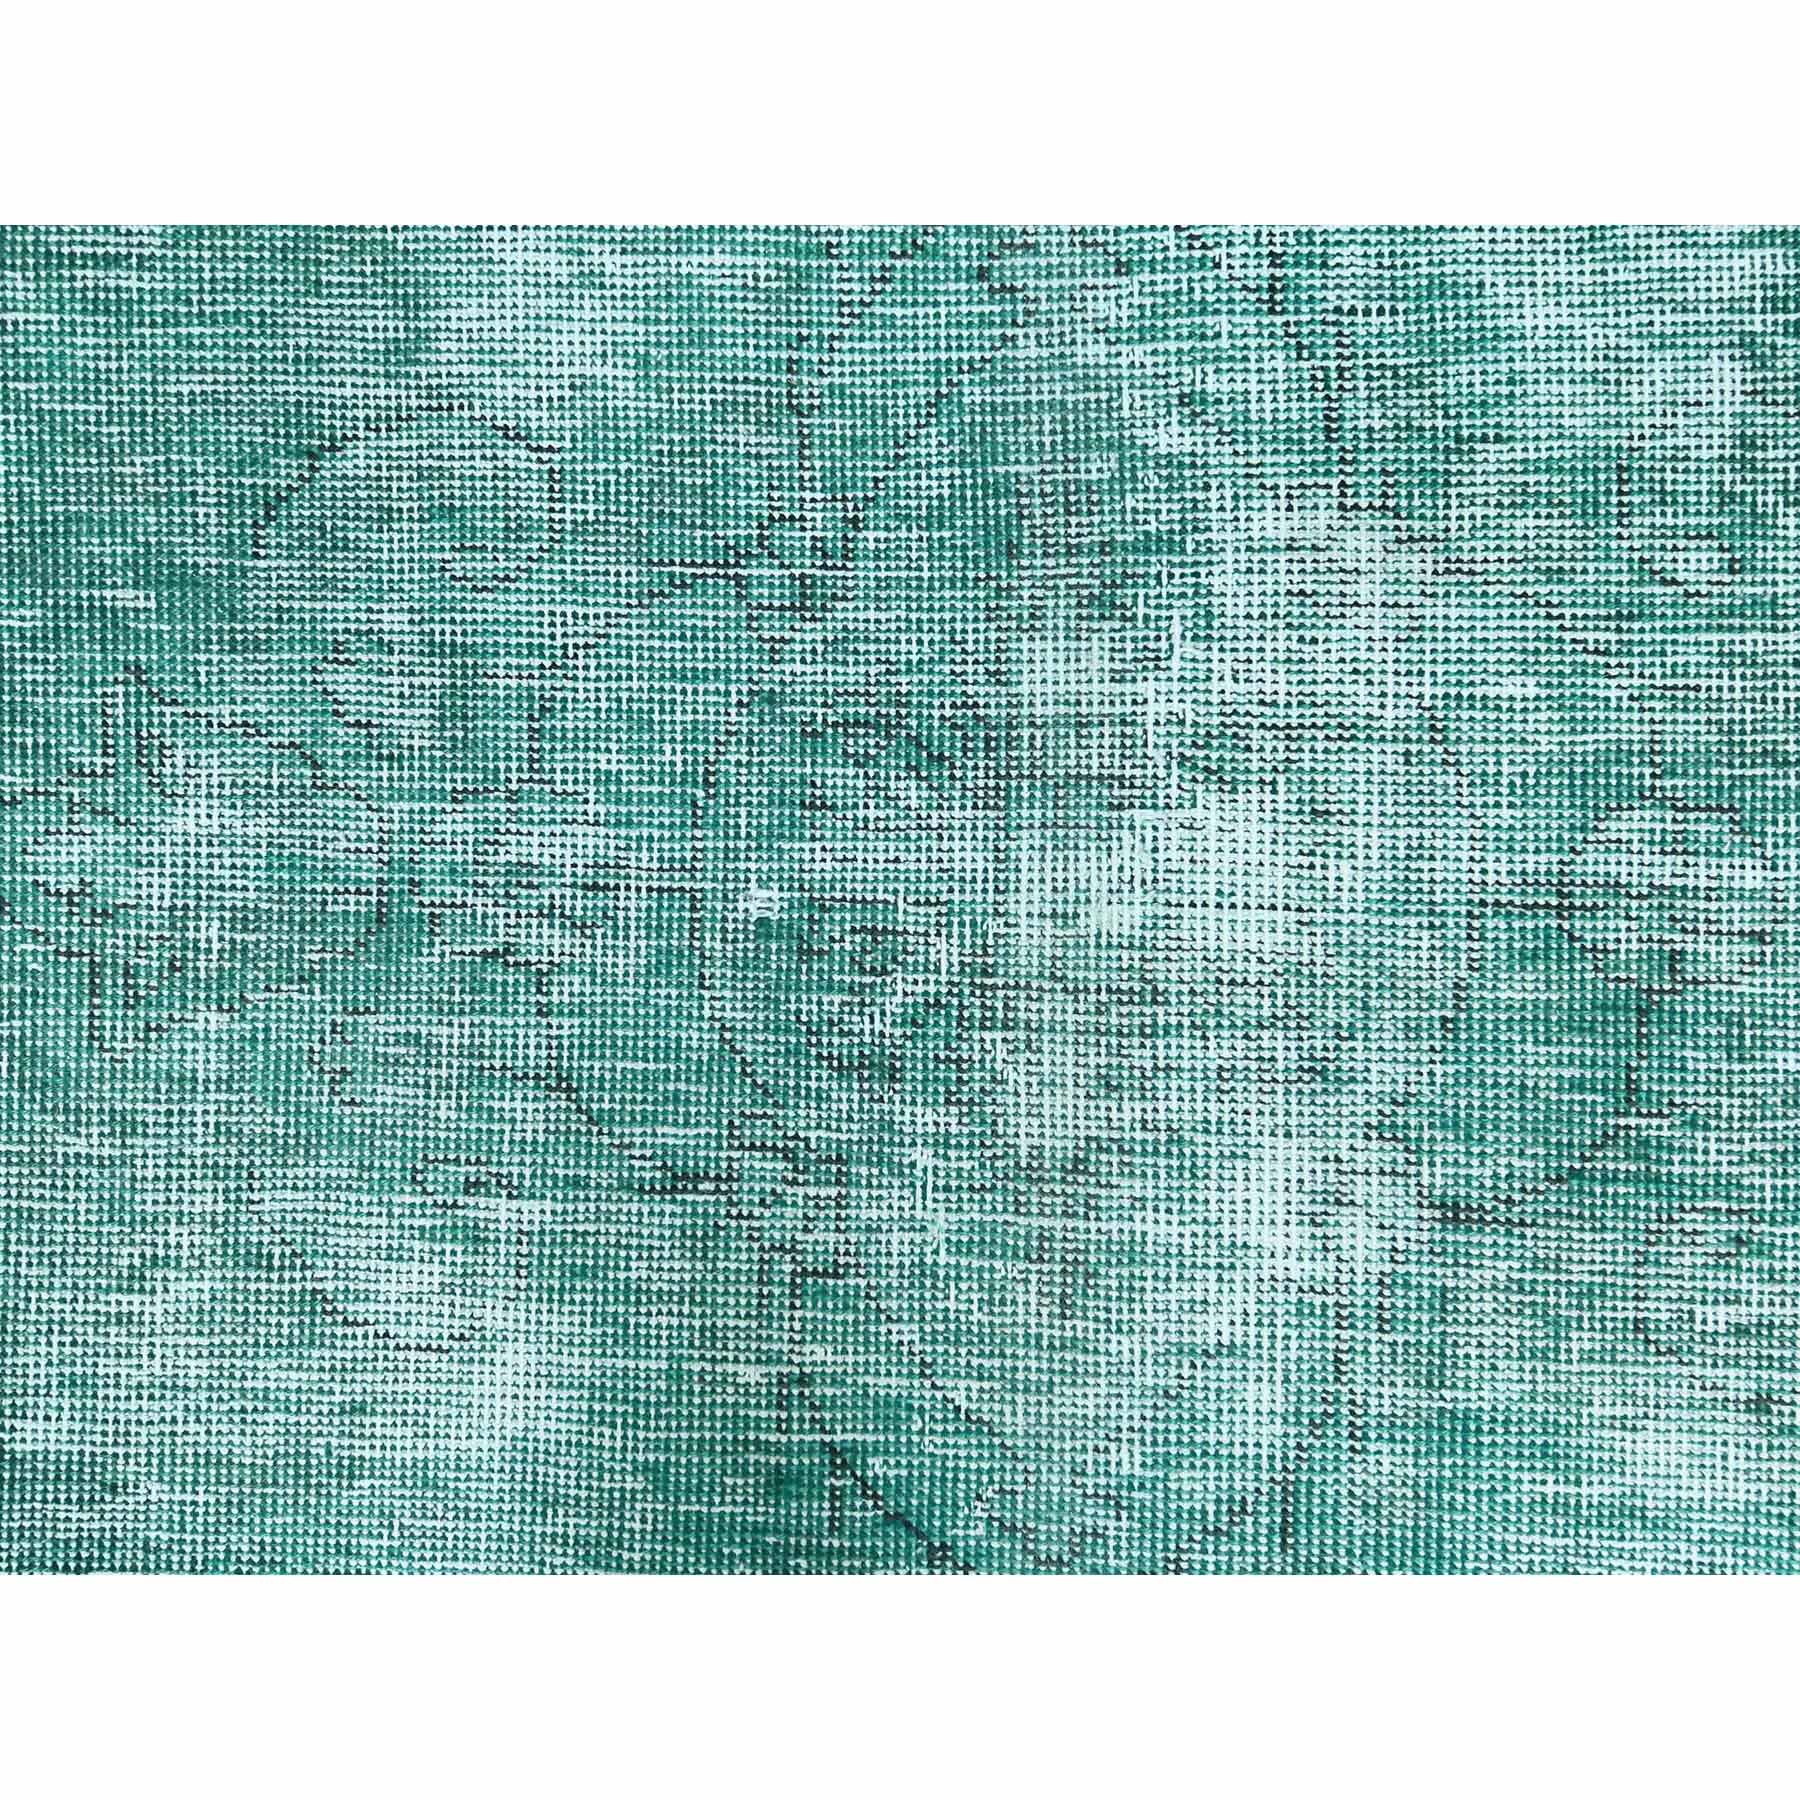 Overdyed-Vintage-Hand-Knotted-Rug-412710